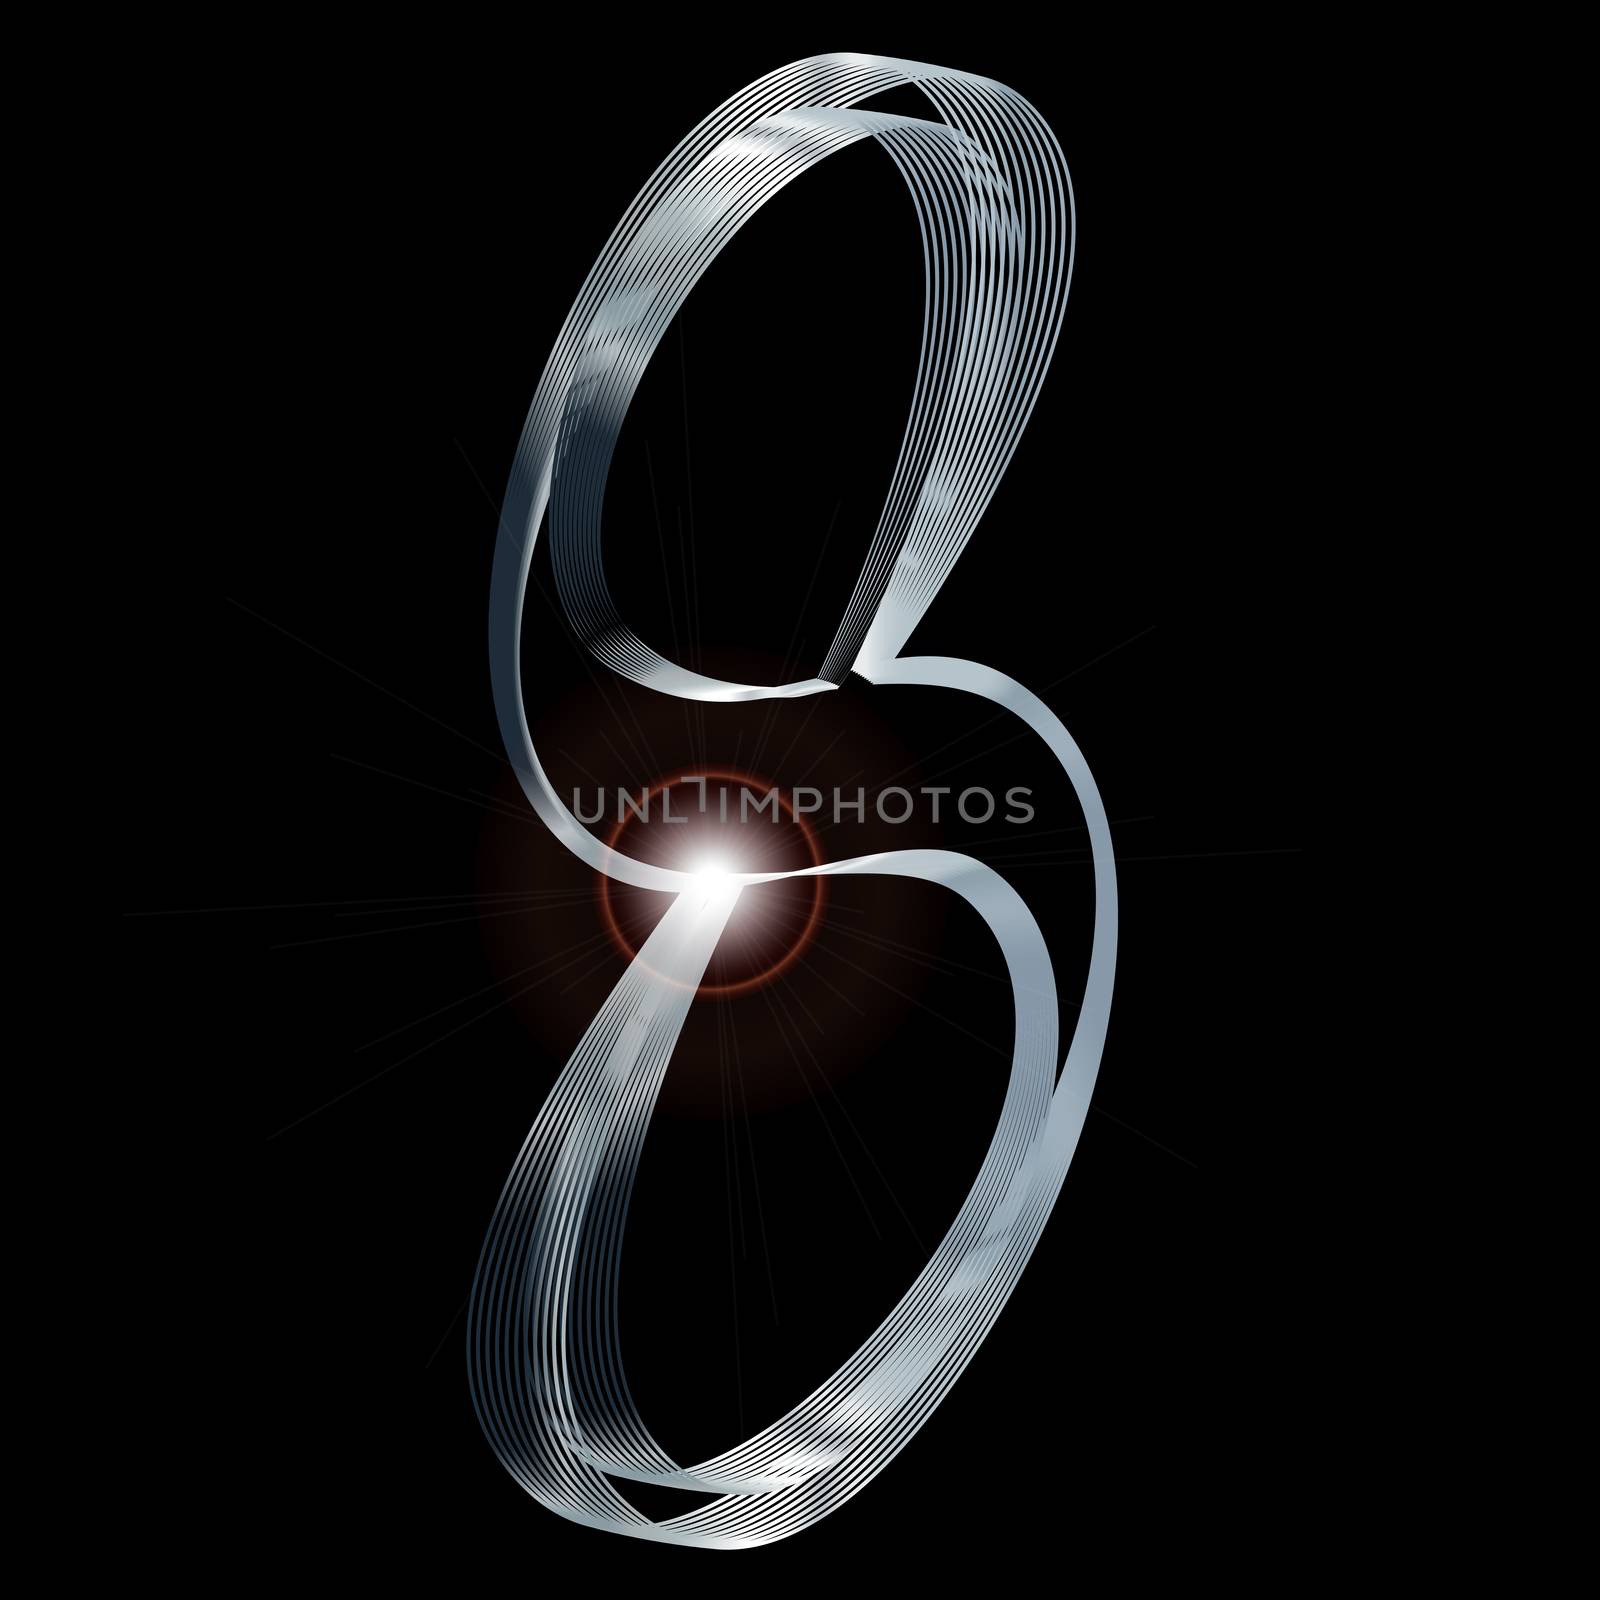 The number eight depicted in fine silver thread over a black background